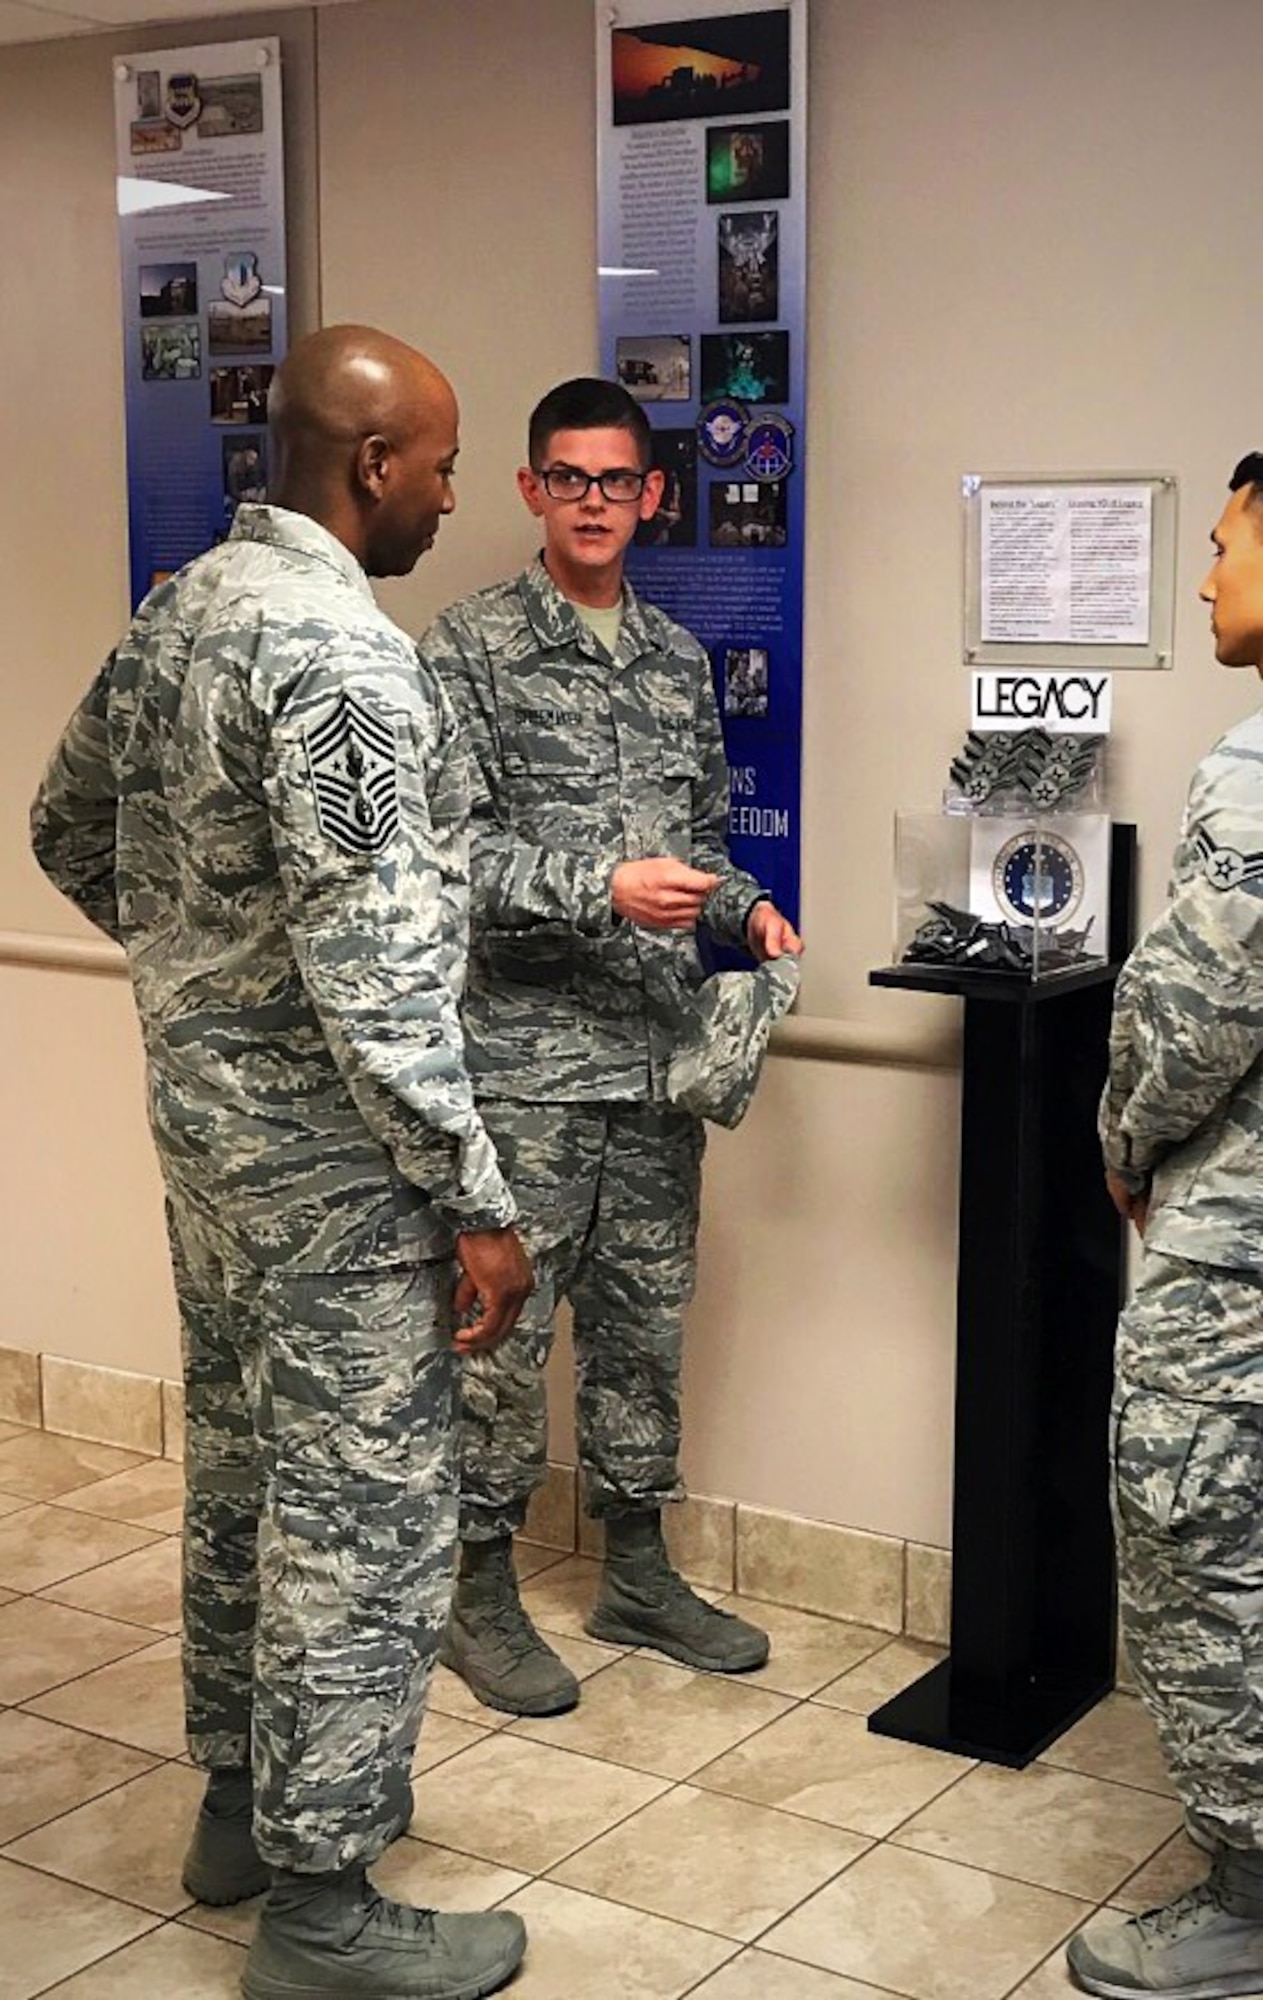 Chief Master Sgt. of the Air Force Kaleth O. Wright meets with Airman 1st Class Michael Shoemaker and Airman 1st Class Anthony Robbins, founder and cofounder of the Legacy Stripes Program, Aug. 4, 2017, at Joint Base San Antonio-Fort Sam Houston, Texas. To honor the legacy that service members create, Shoemaker and Robbins while still in technical training, saw an opportunity to encourage the donation of more than 1,000 sought-after stripes within a six-month period.